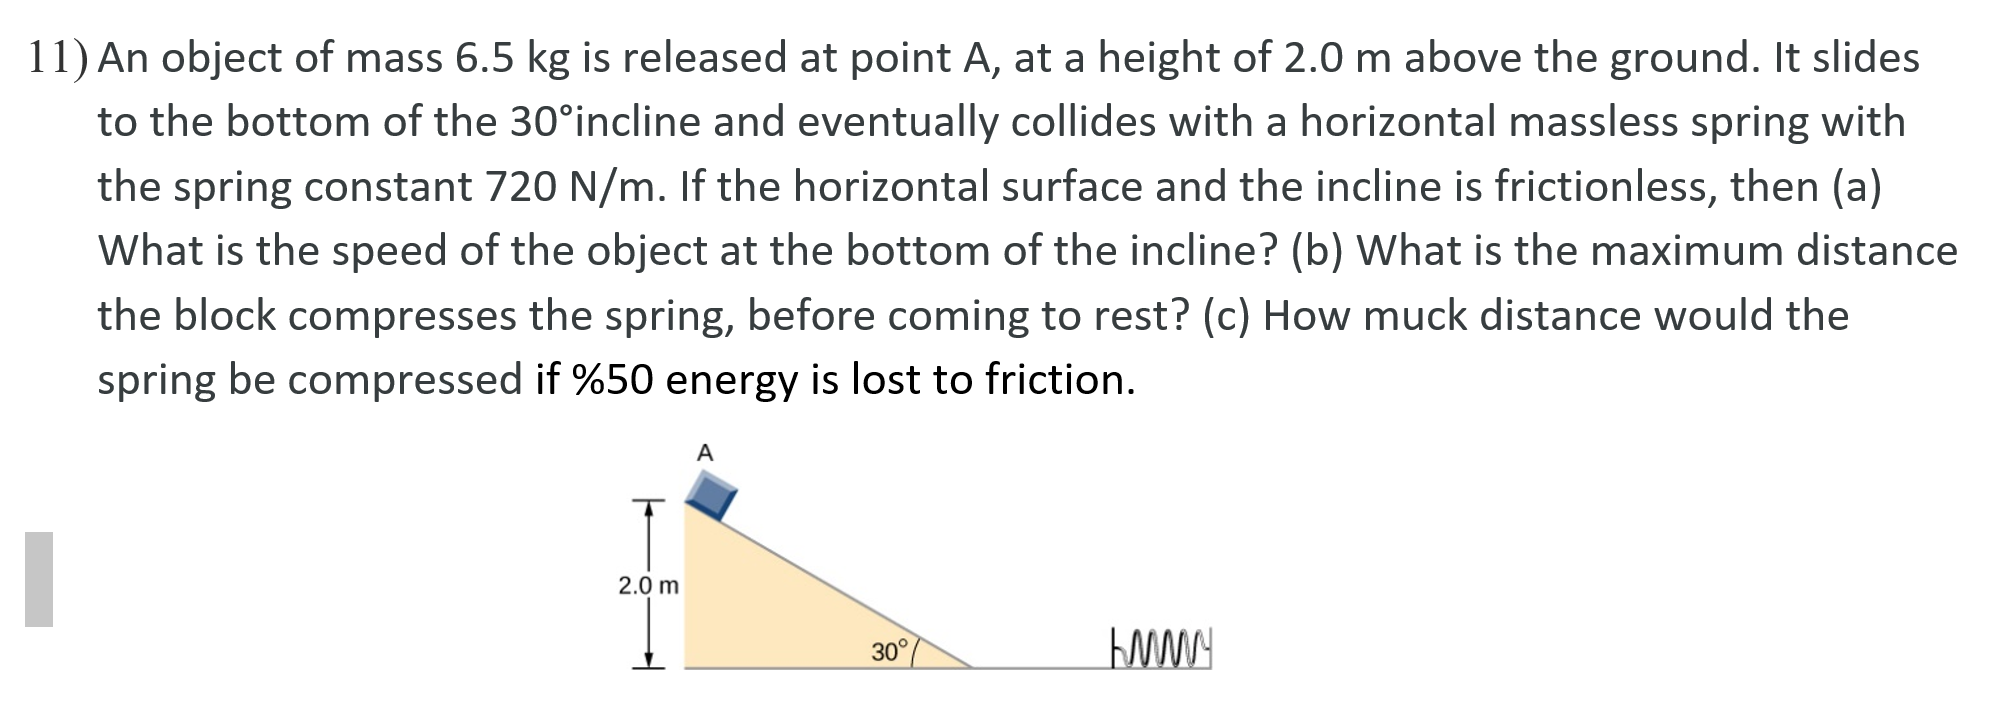 An object of mass 6.5 kg is released at point A, at a height of 2.0 m above the ground. It slides
to the bottom of the 30°incline and eventually collides with a horizontal massless spring with
the spring constant 720 N/m. If the horizontal surface and the incline is frictionless, then (a)
What is the speed of the object at the bottom of the incline? (b) What is the maximum distance
the block compresses the spring, before coming to rest? (c) How muck distance would the
spring be compressed if %50 energy is lost to friction.
